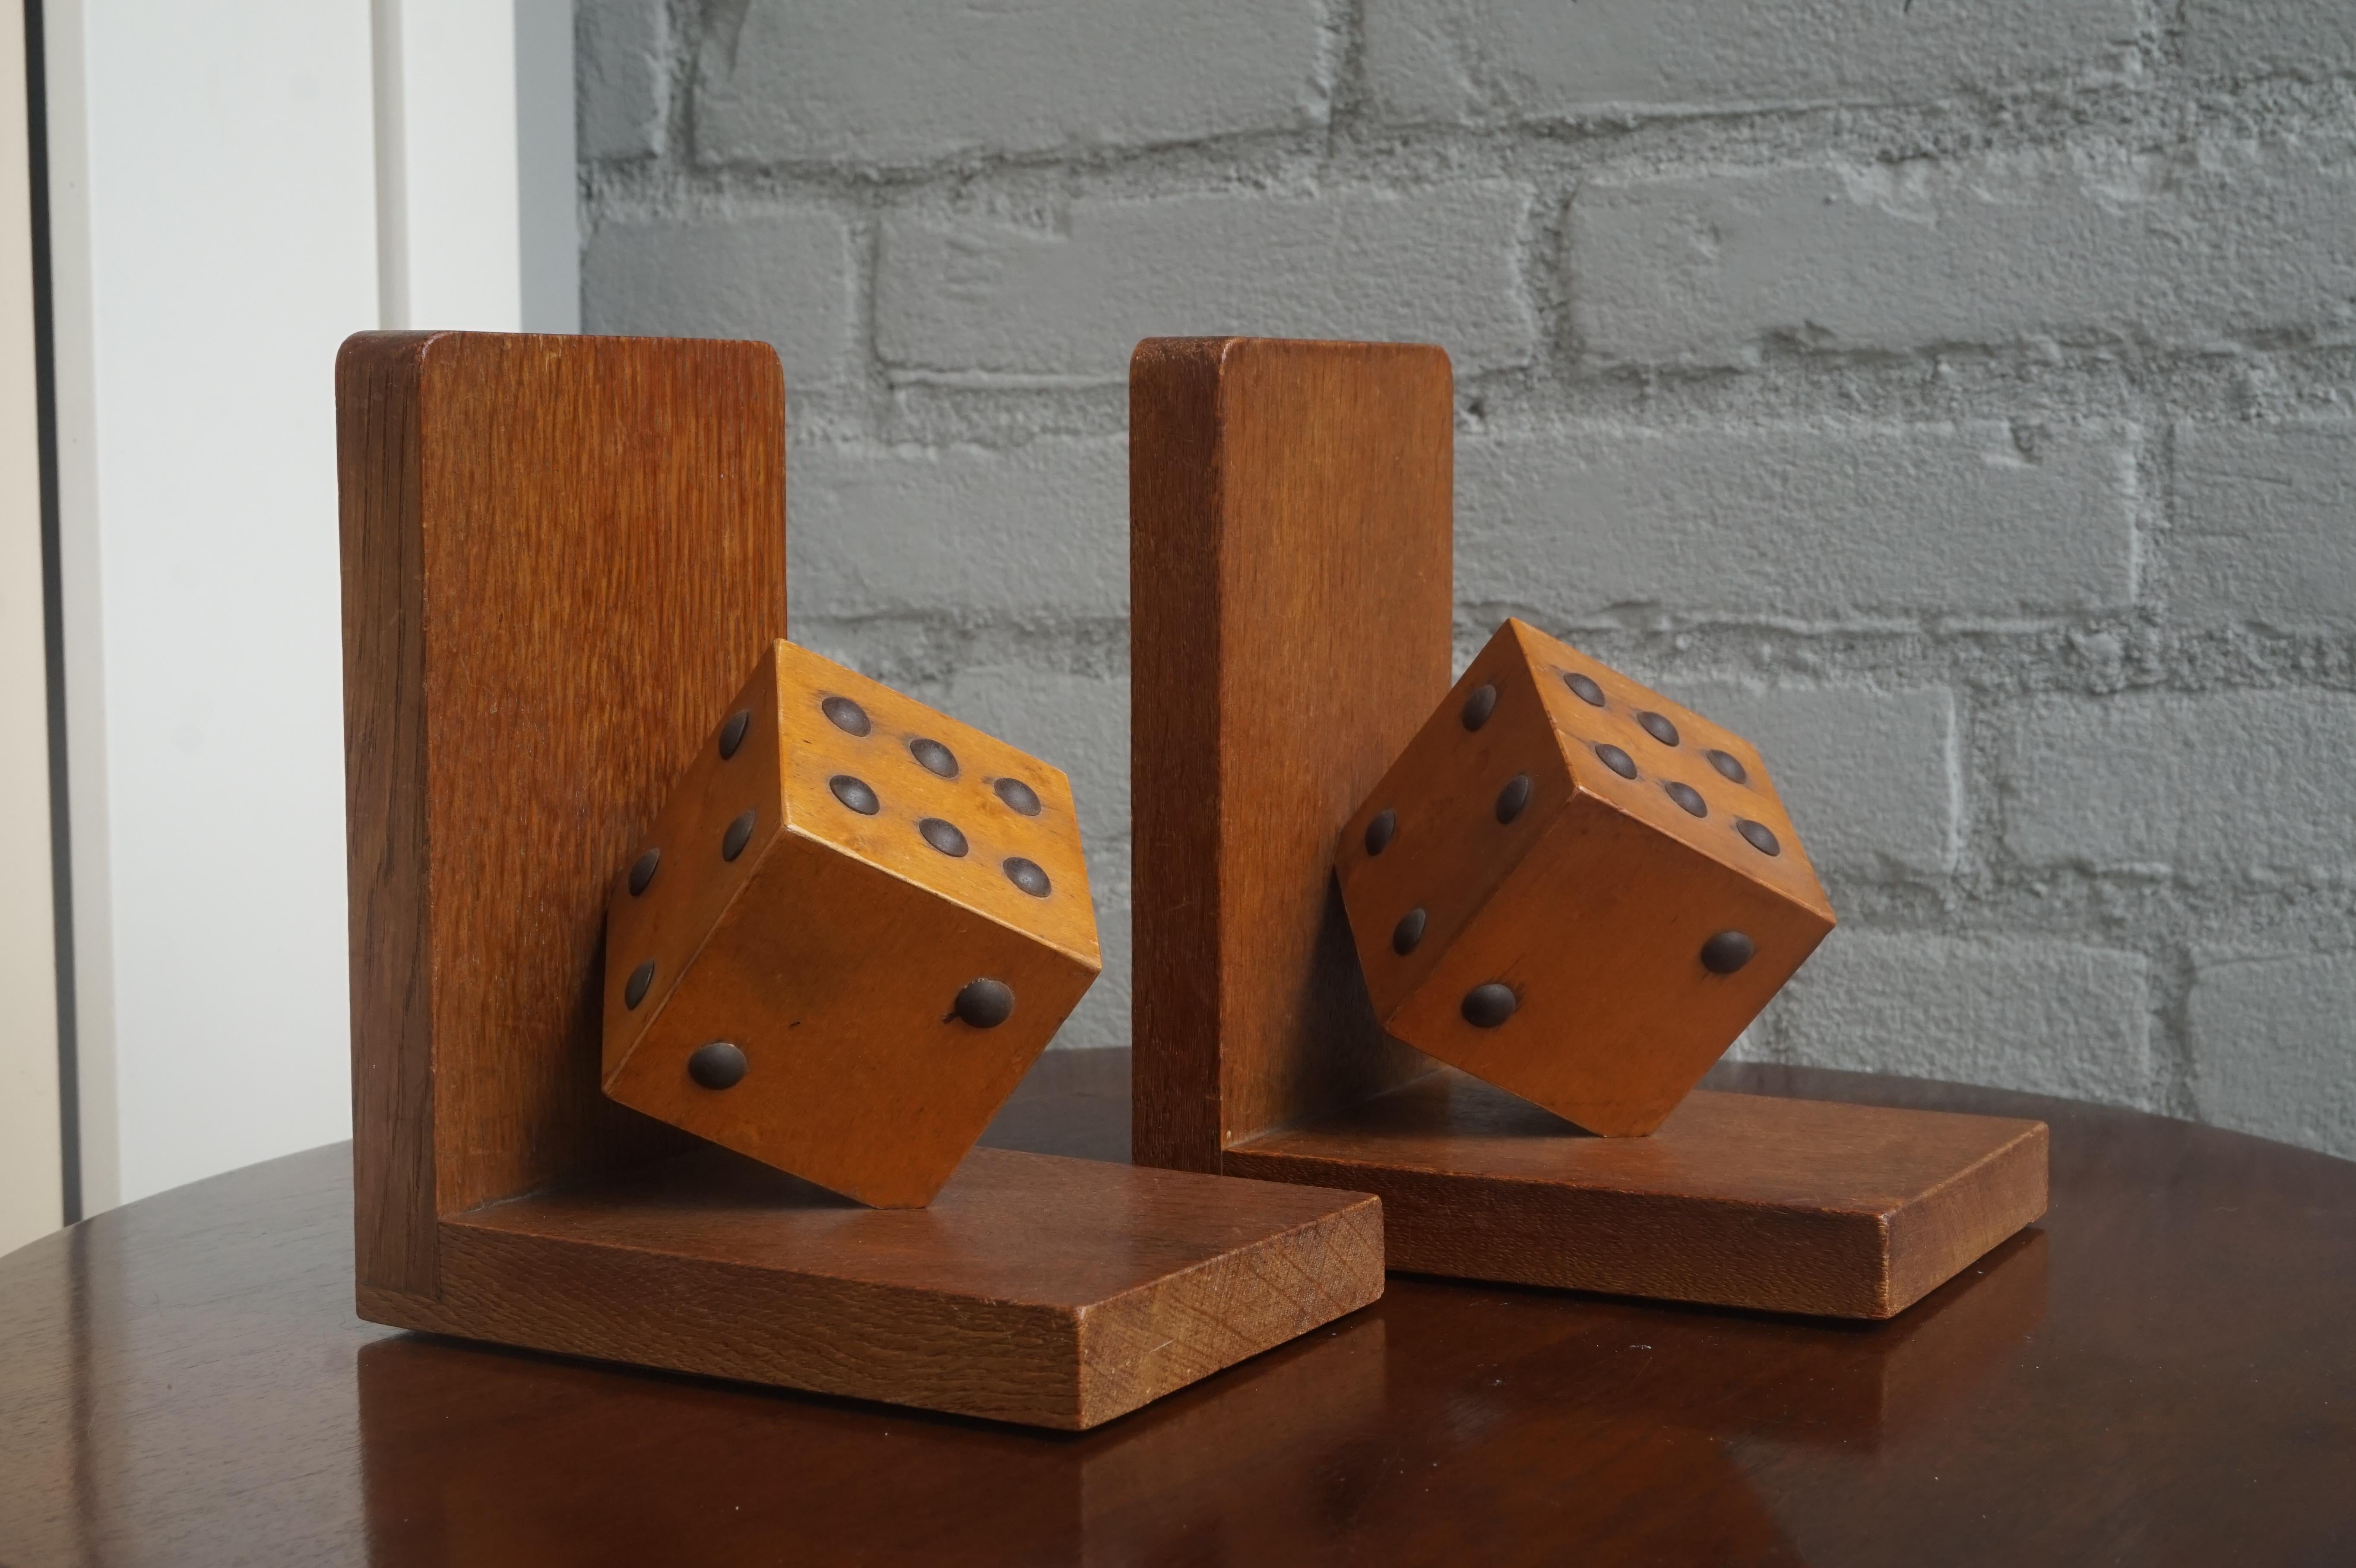 Oak Arts & Crafts Pair of Wooden Dice with Metal Nails Bookends for The Gamblers